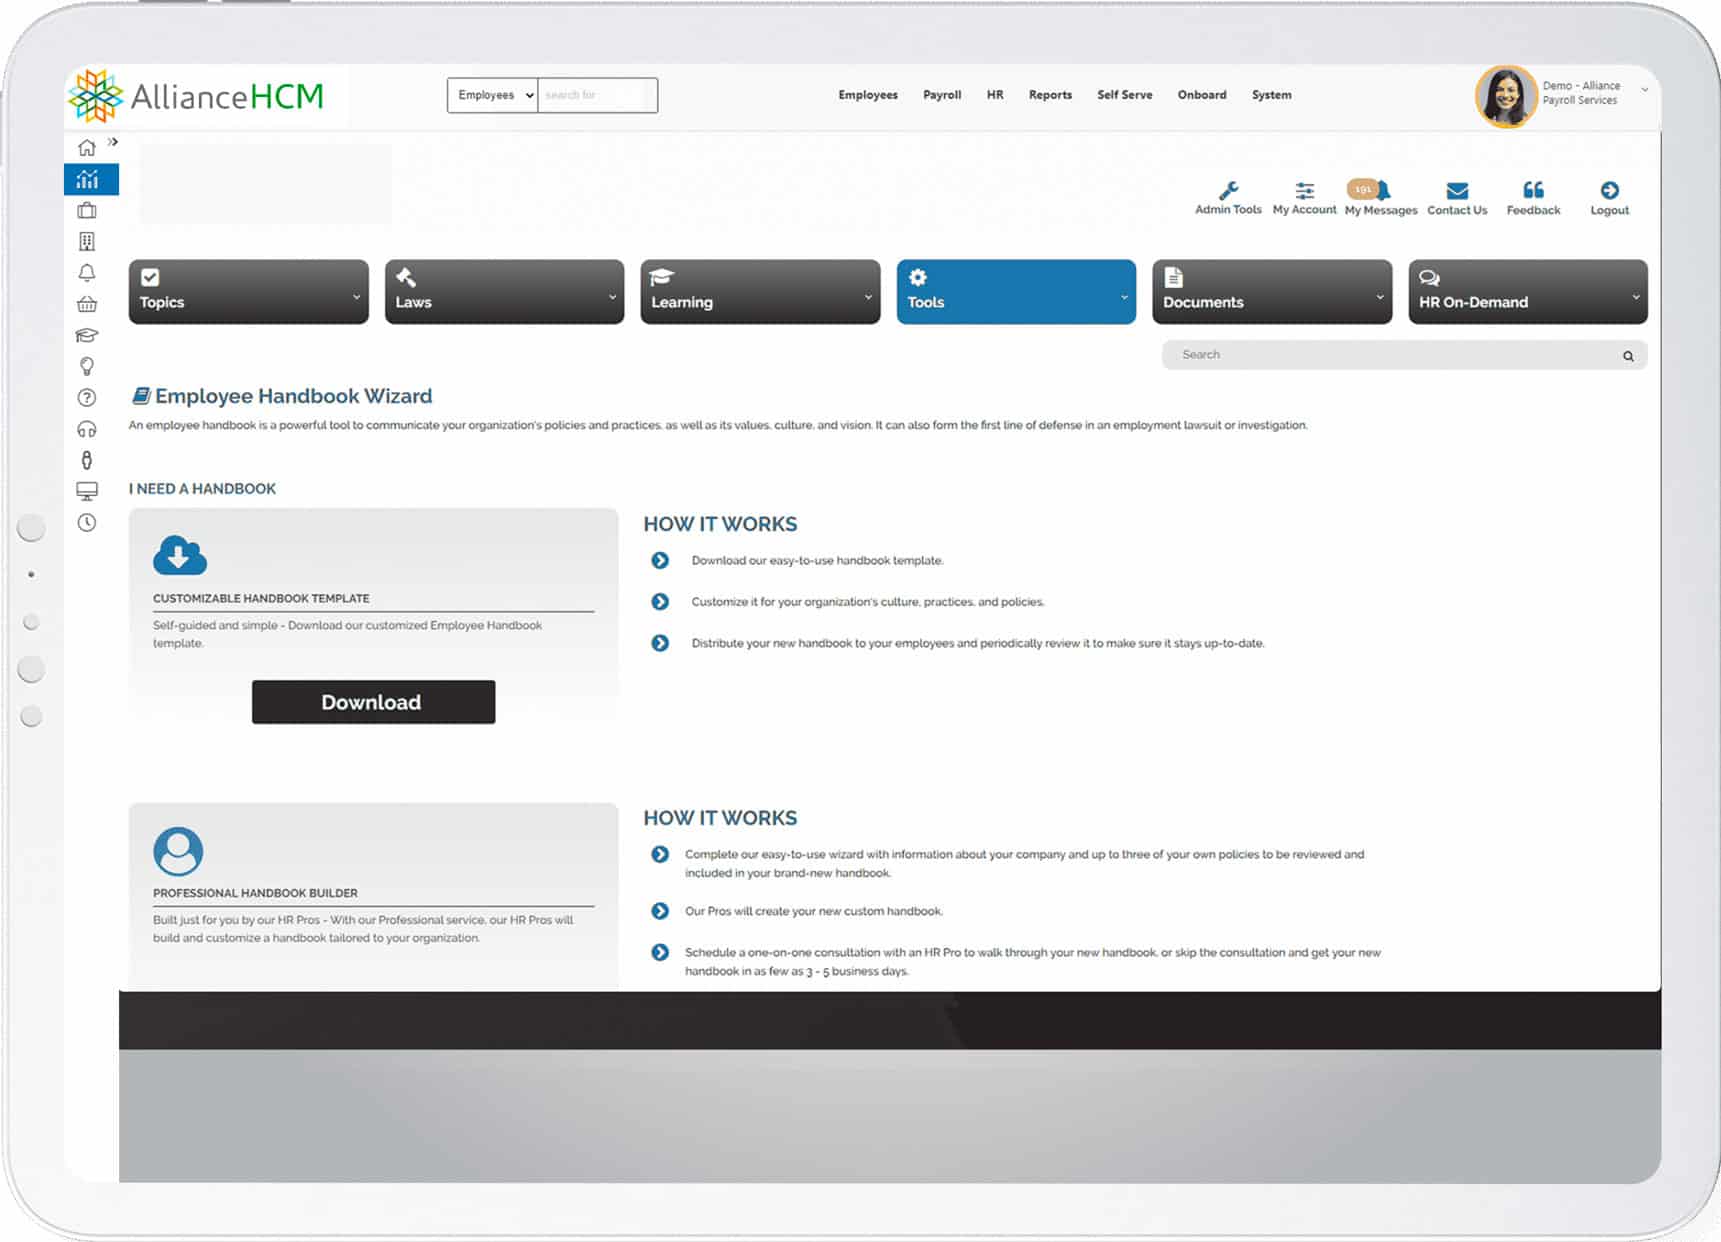 AllianceHCM HR and Learning Management solutions